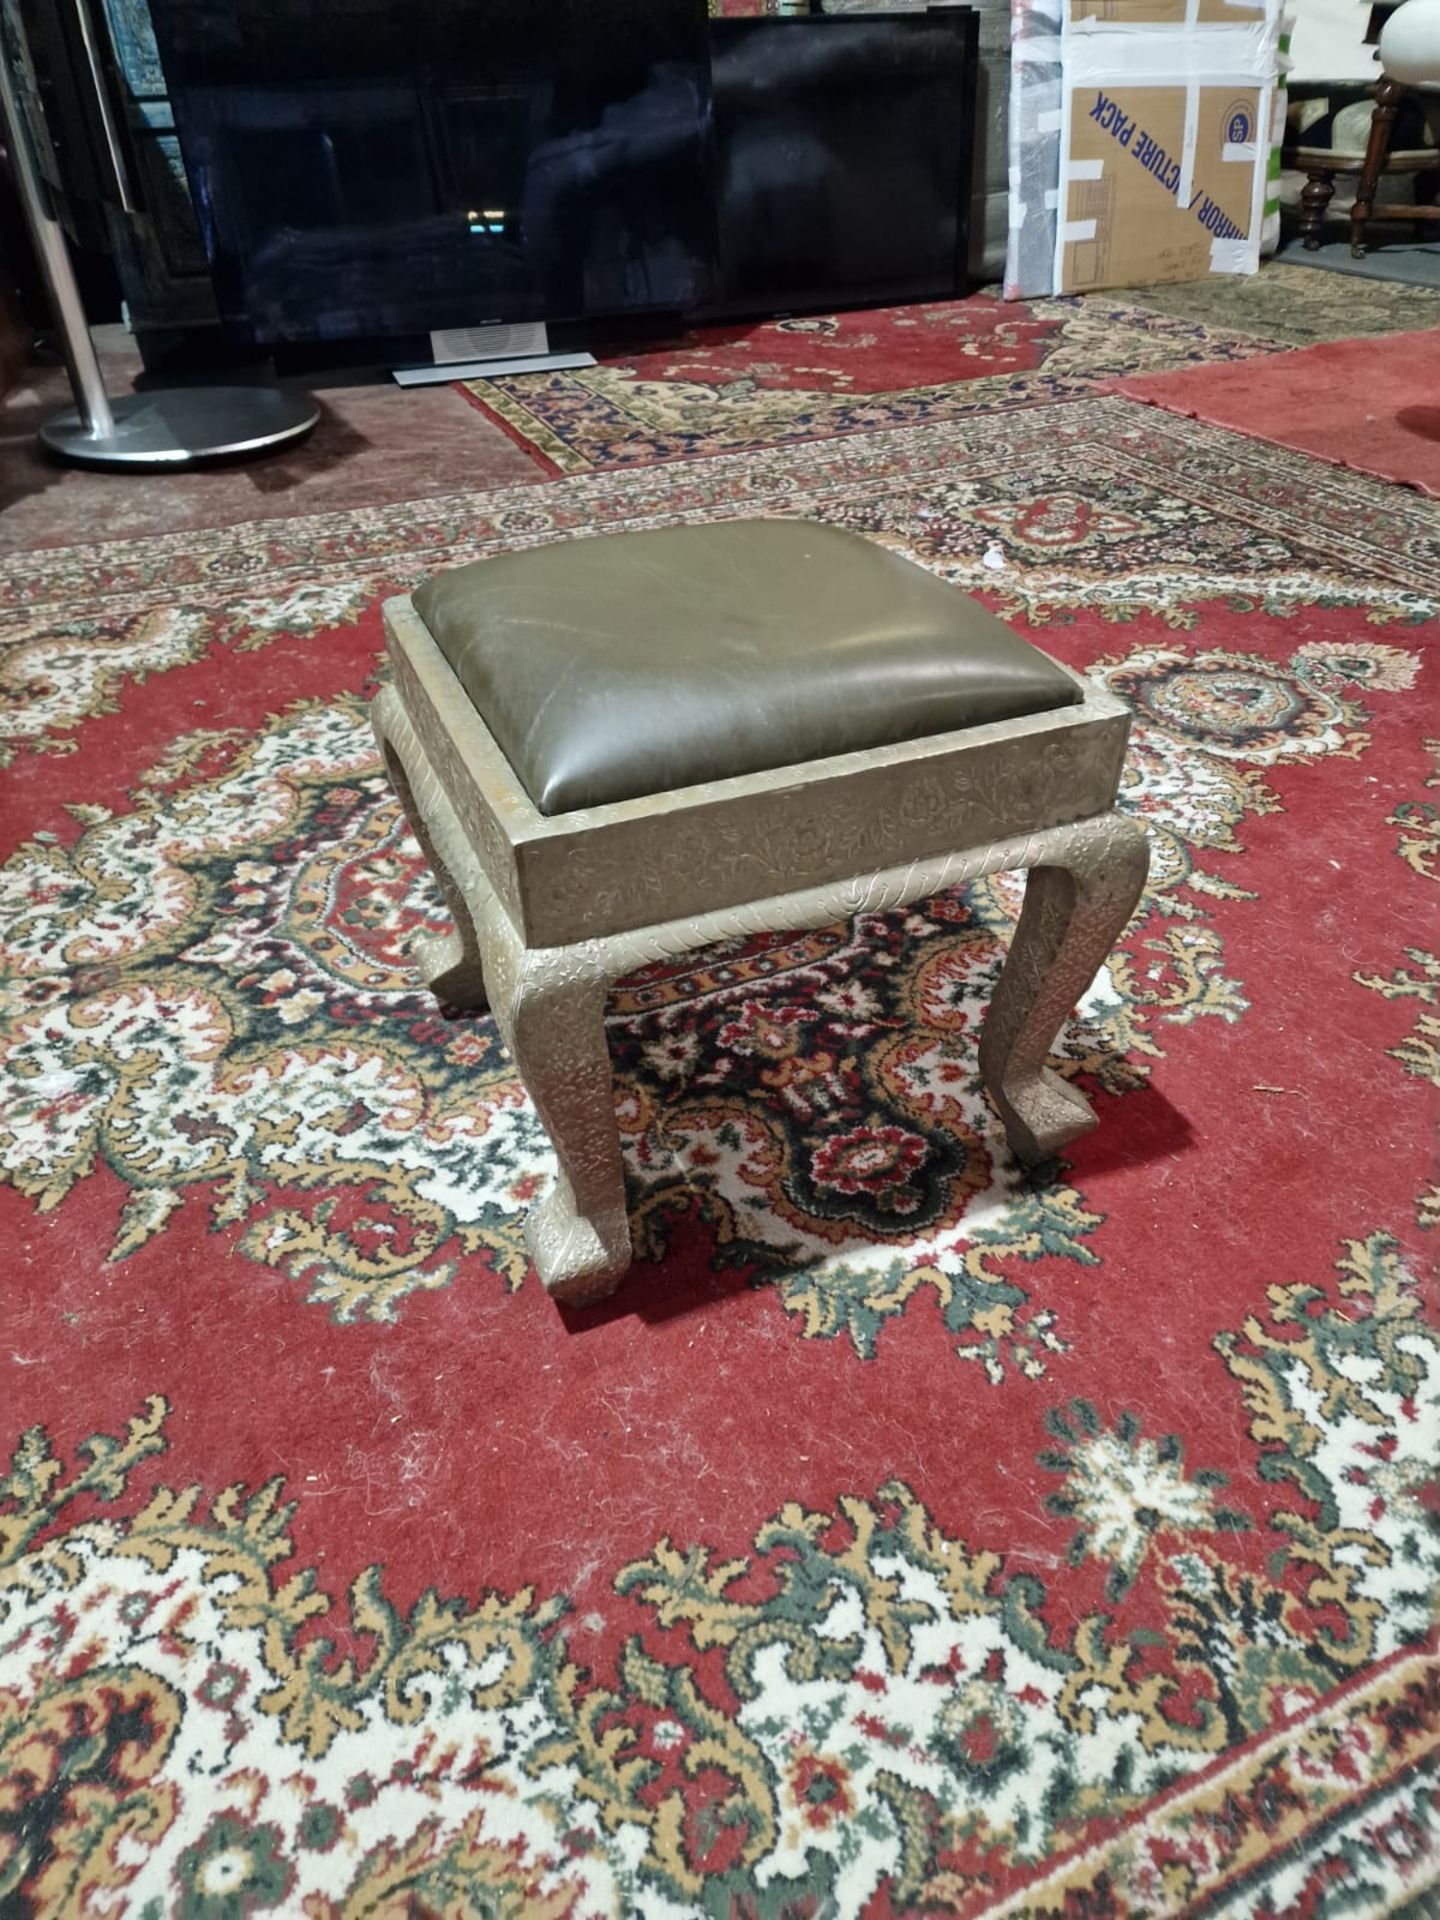 Dowry Chair And Footstool A Striking Vintage Anglo-Indian Silvered Metal-Clad Chair, 20th Century, - Image 6 of 16